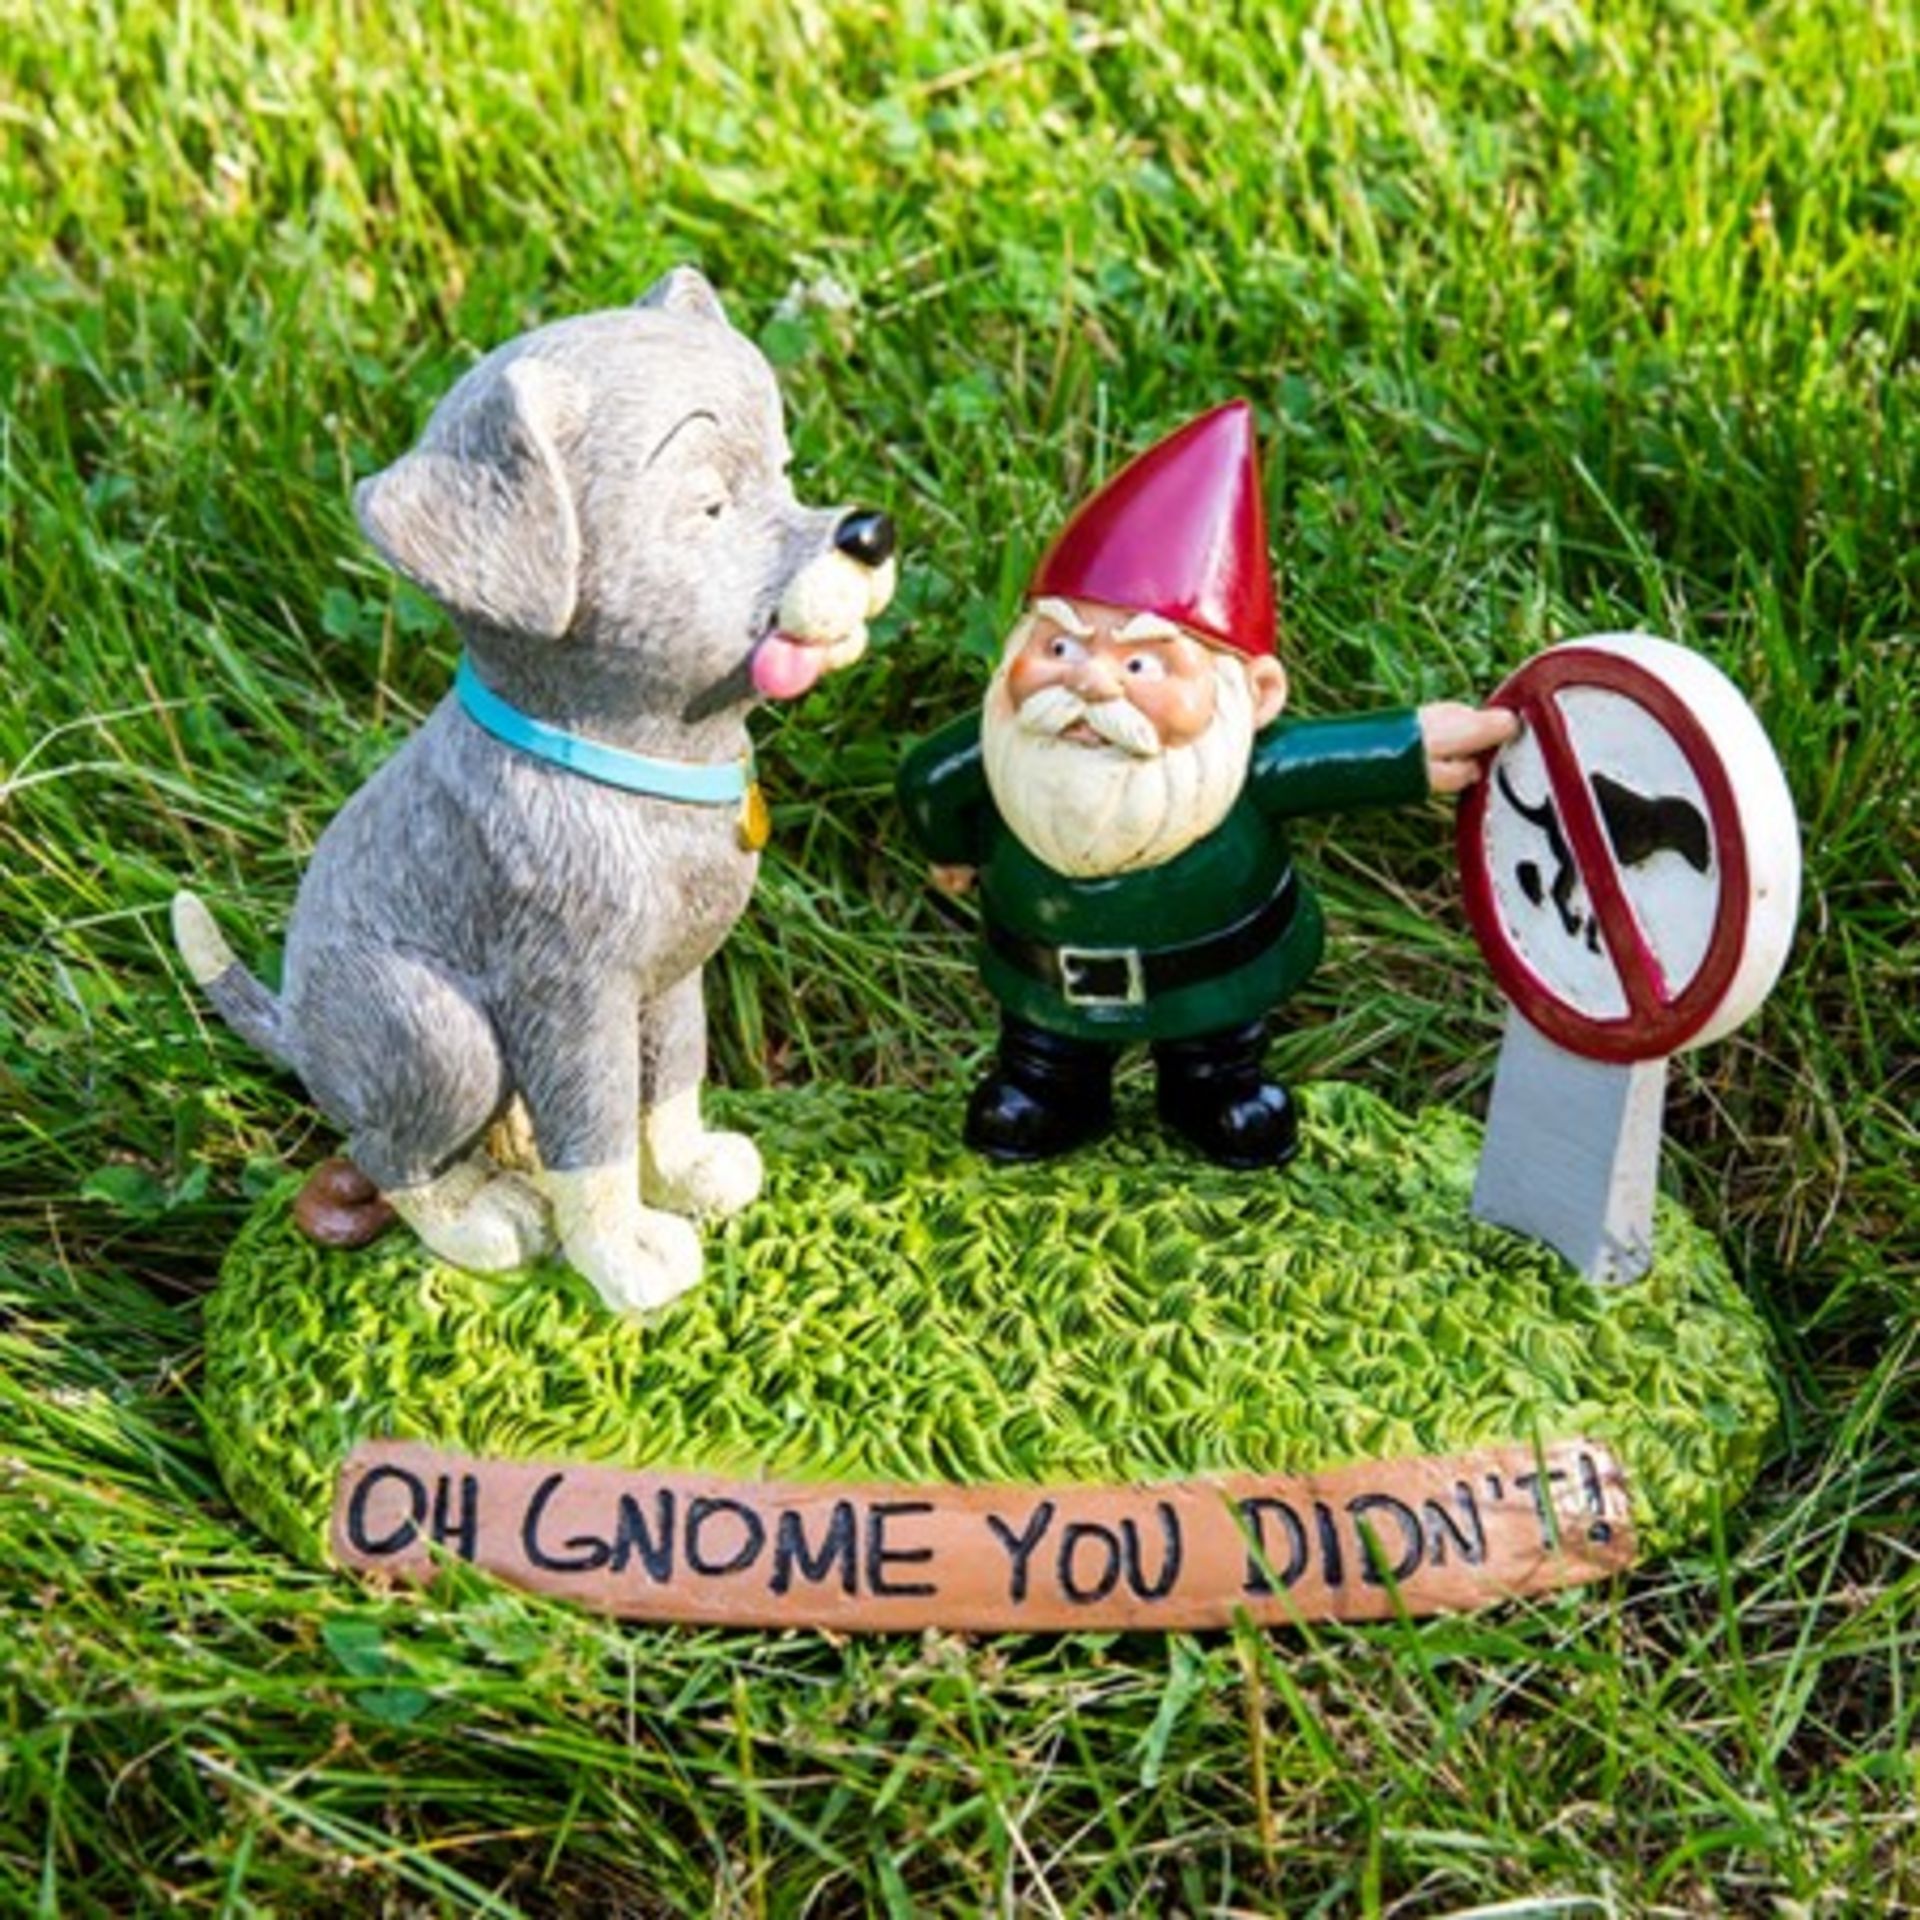 New Bag Dog Oh Gnome They Didn’t Garden Gnome